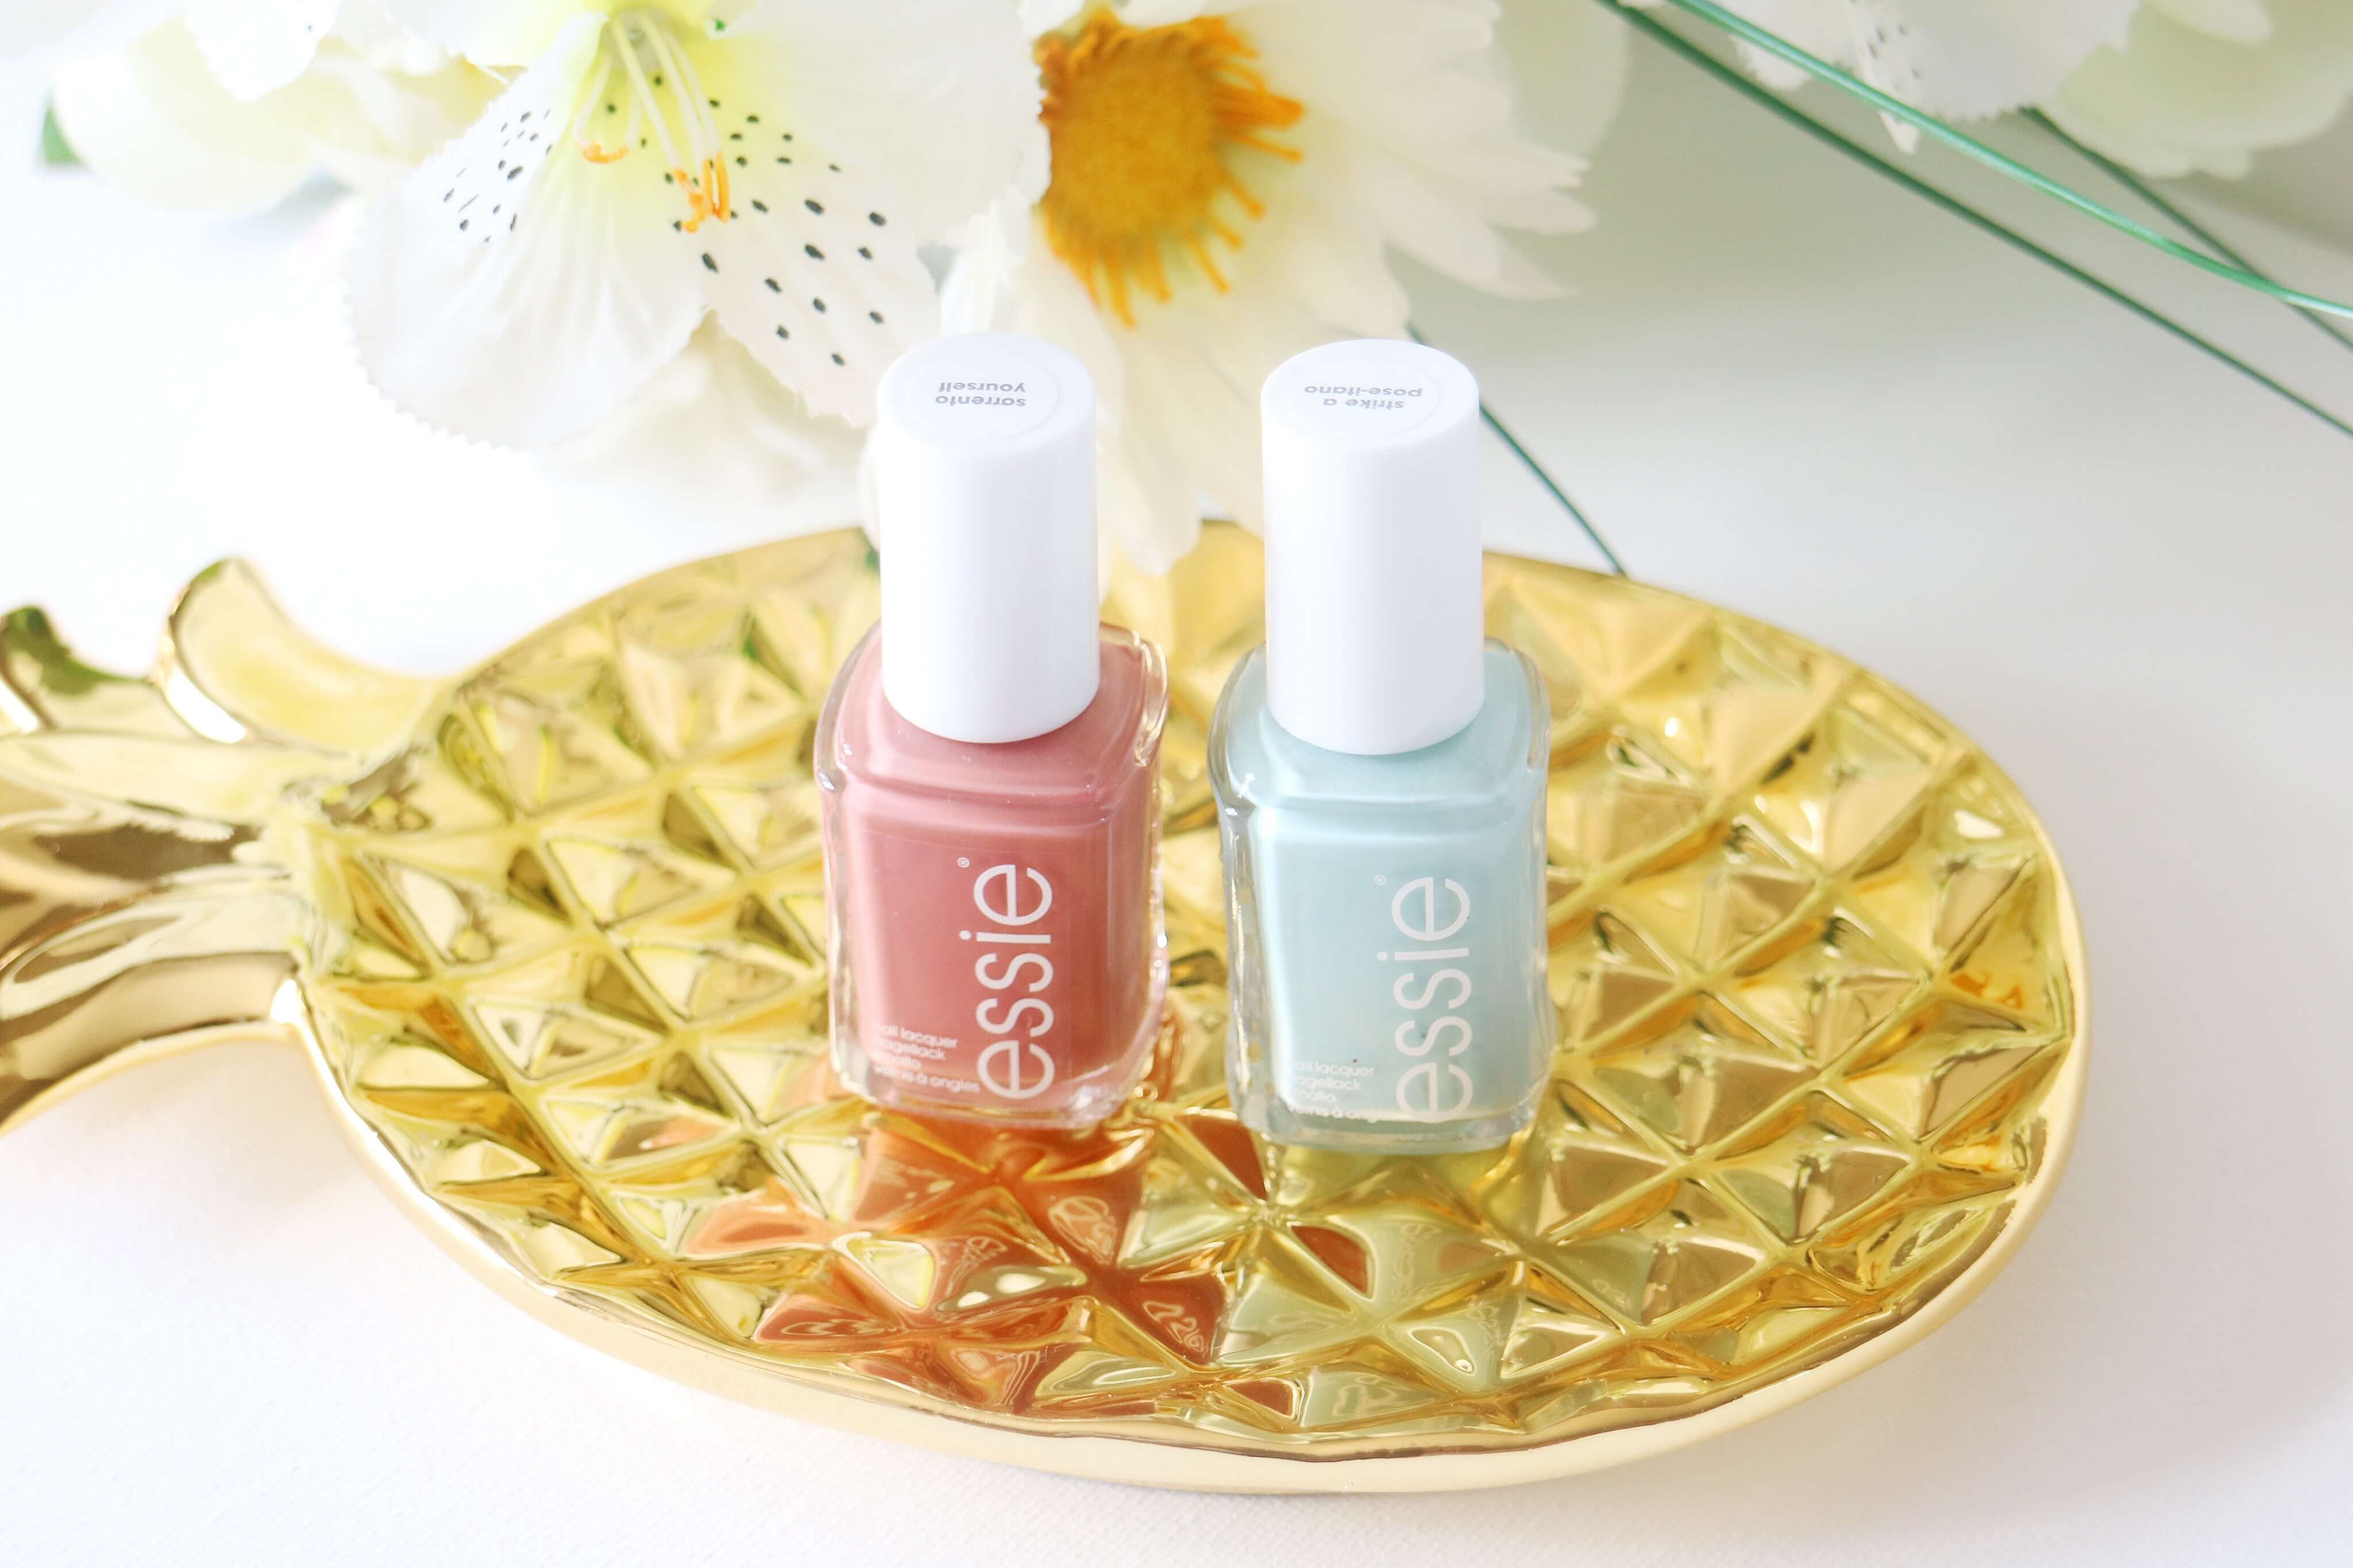 ESSIE NAIL POLISH Resort 2017 collection in Sorrento Yourself and Strike a positano